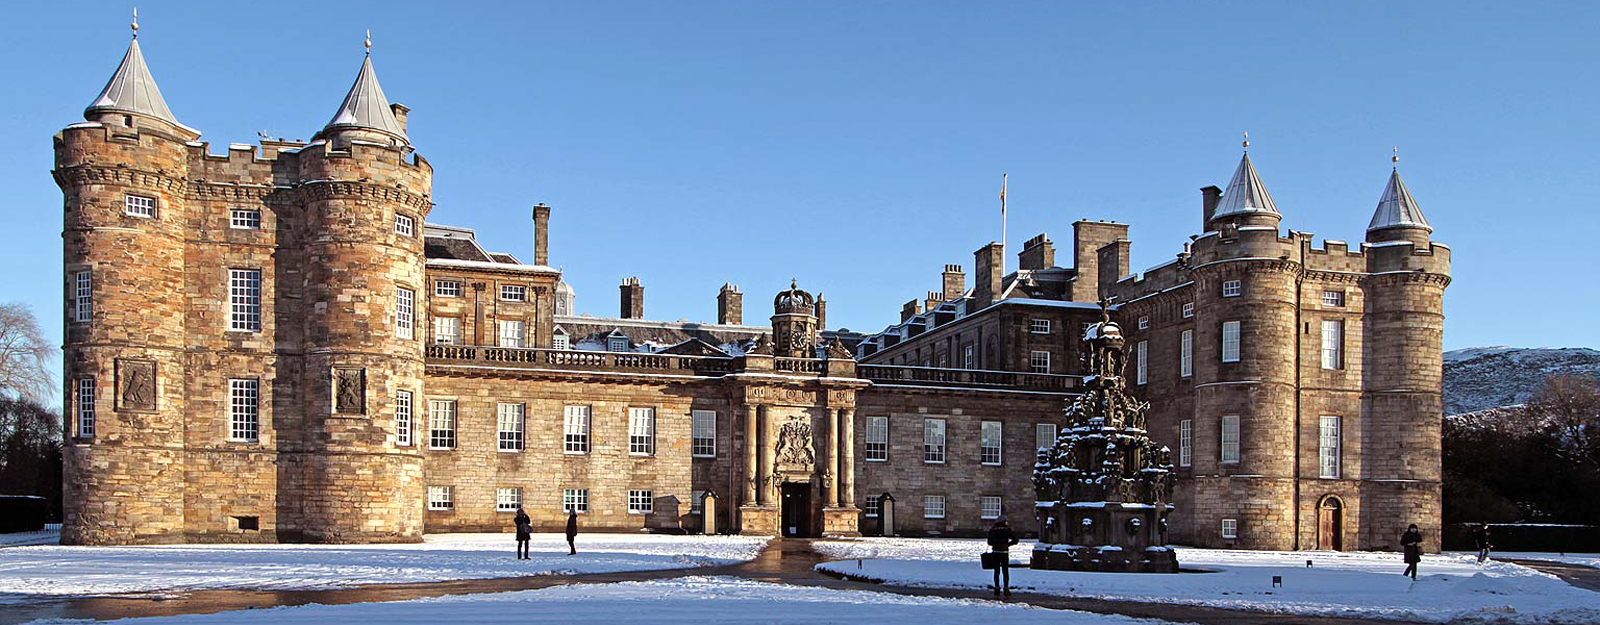 Palace of Holyroodhouse in the snow.